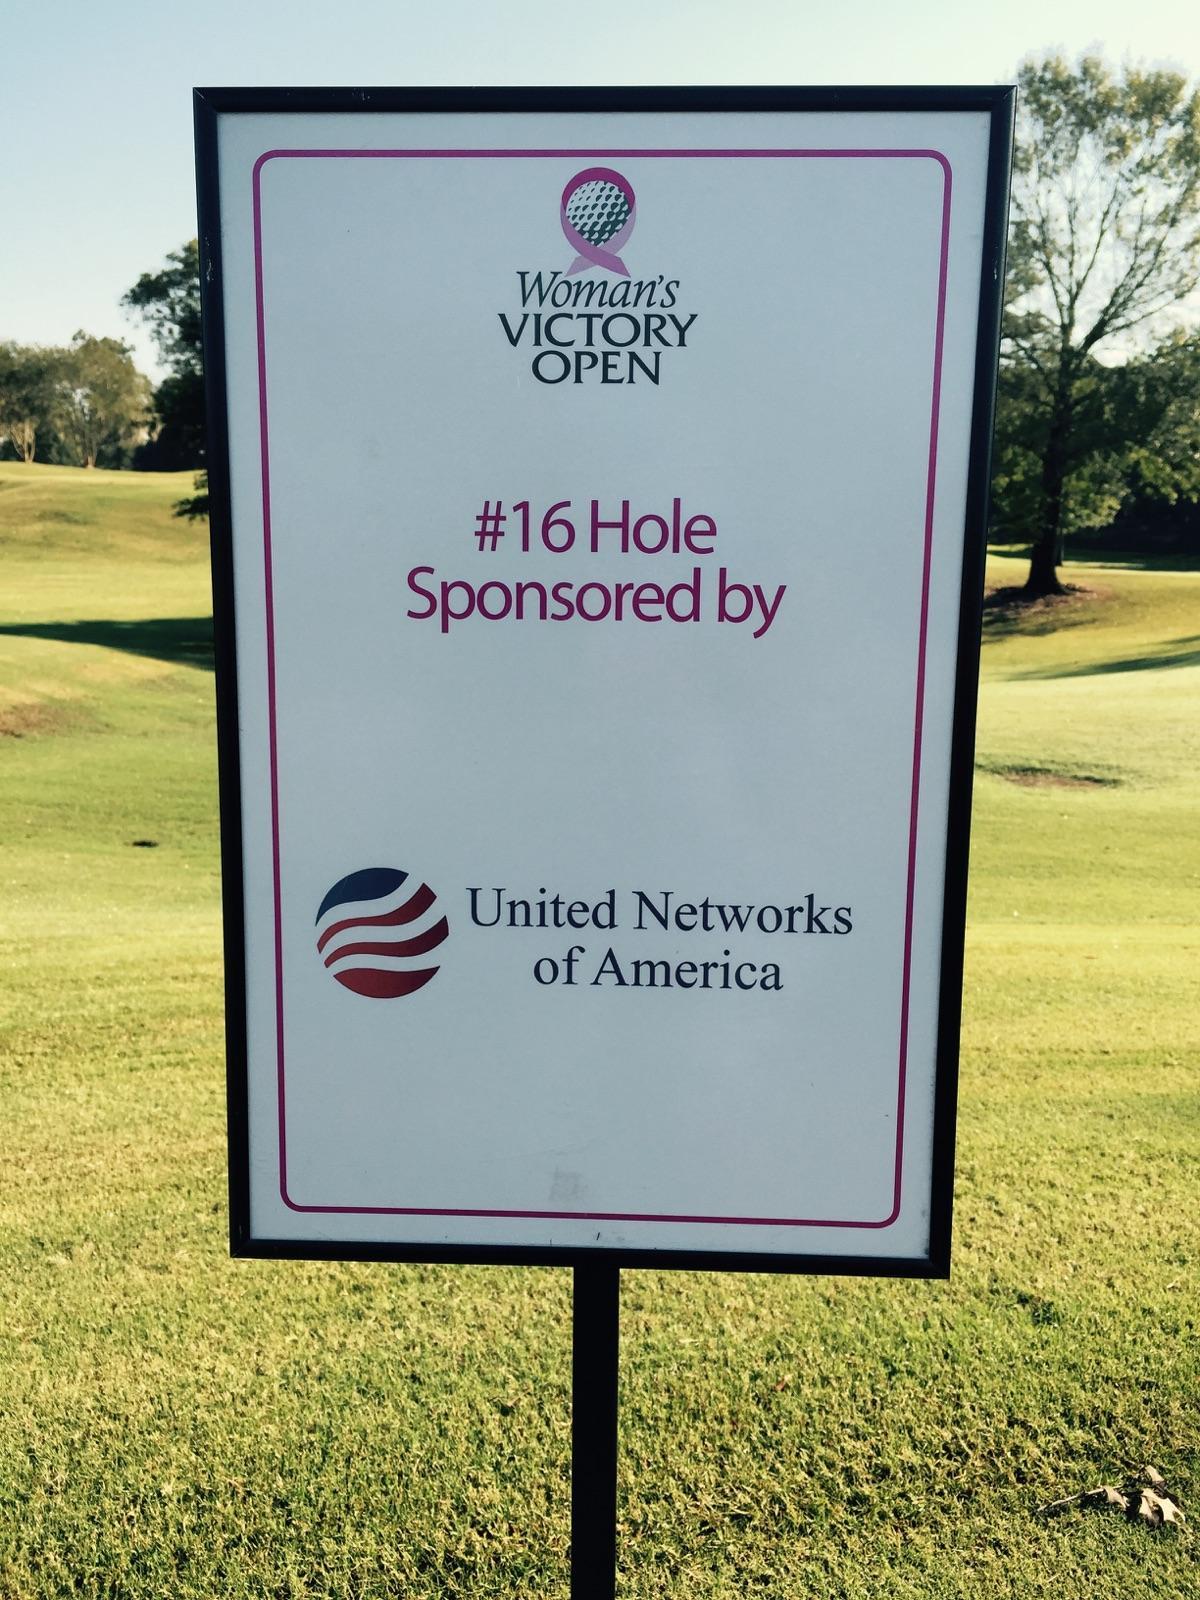 United Networks of America is a proud supporter of the Woman's Victory Open